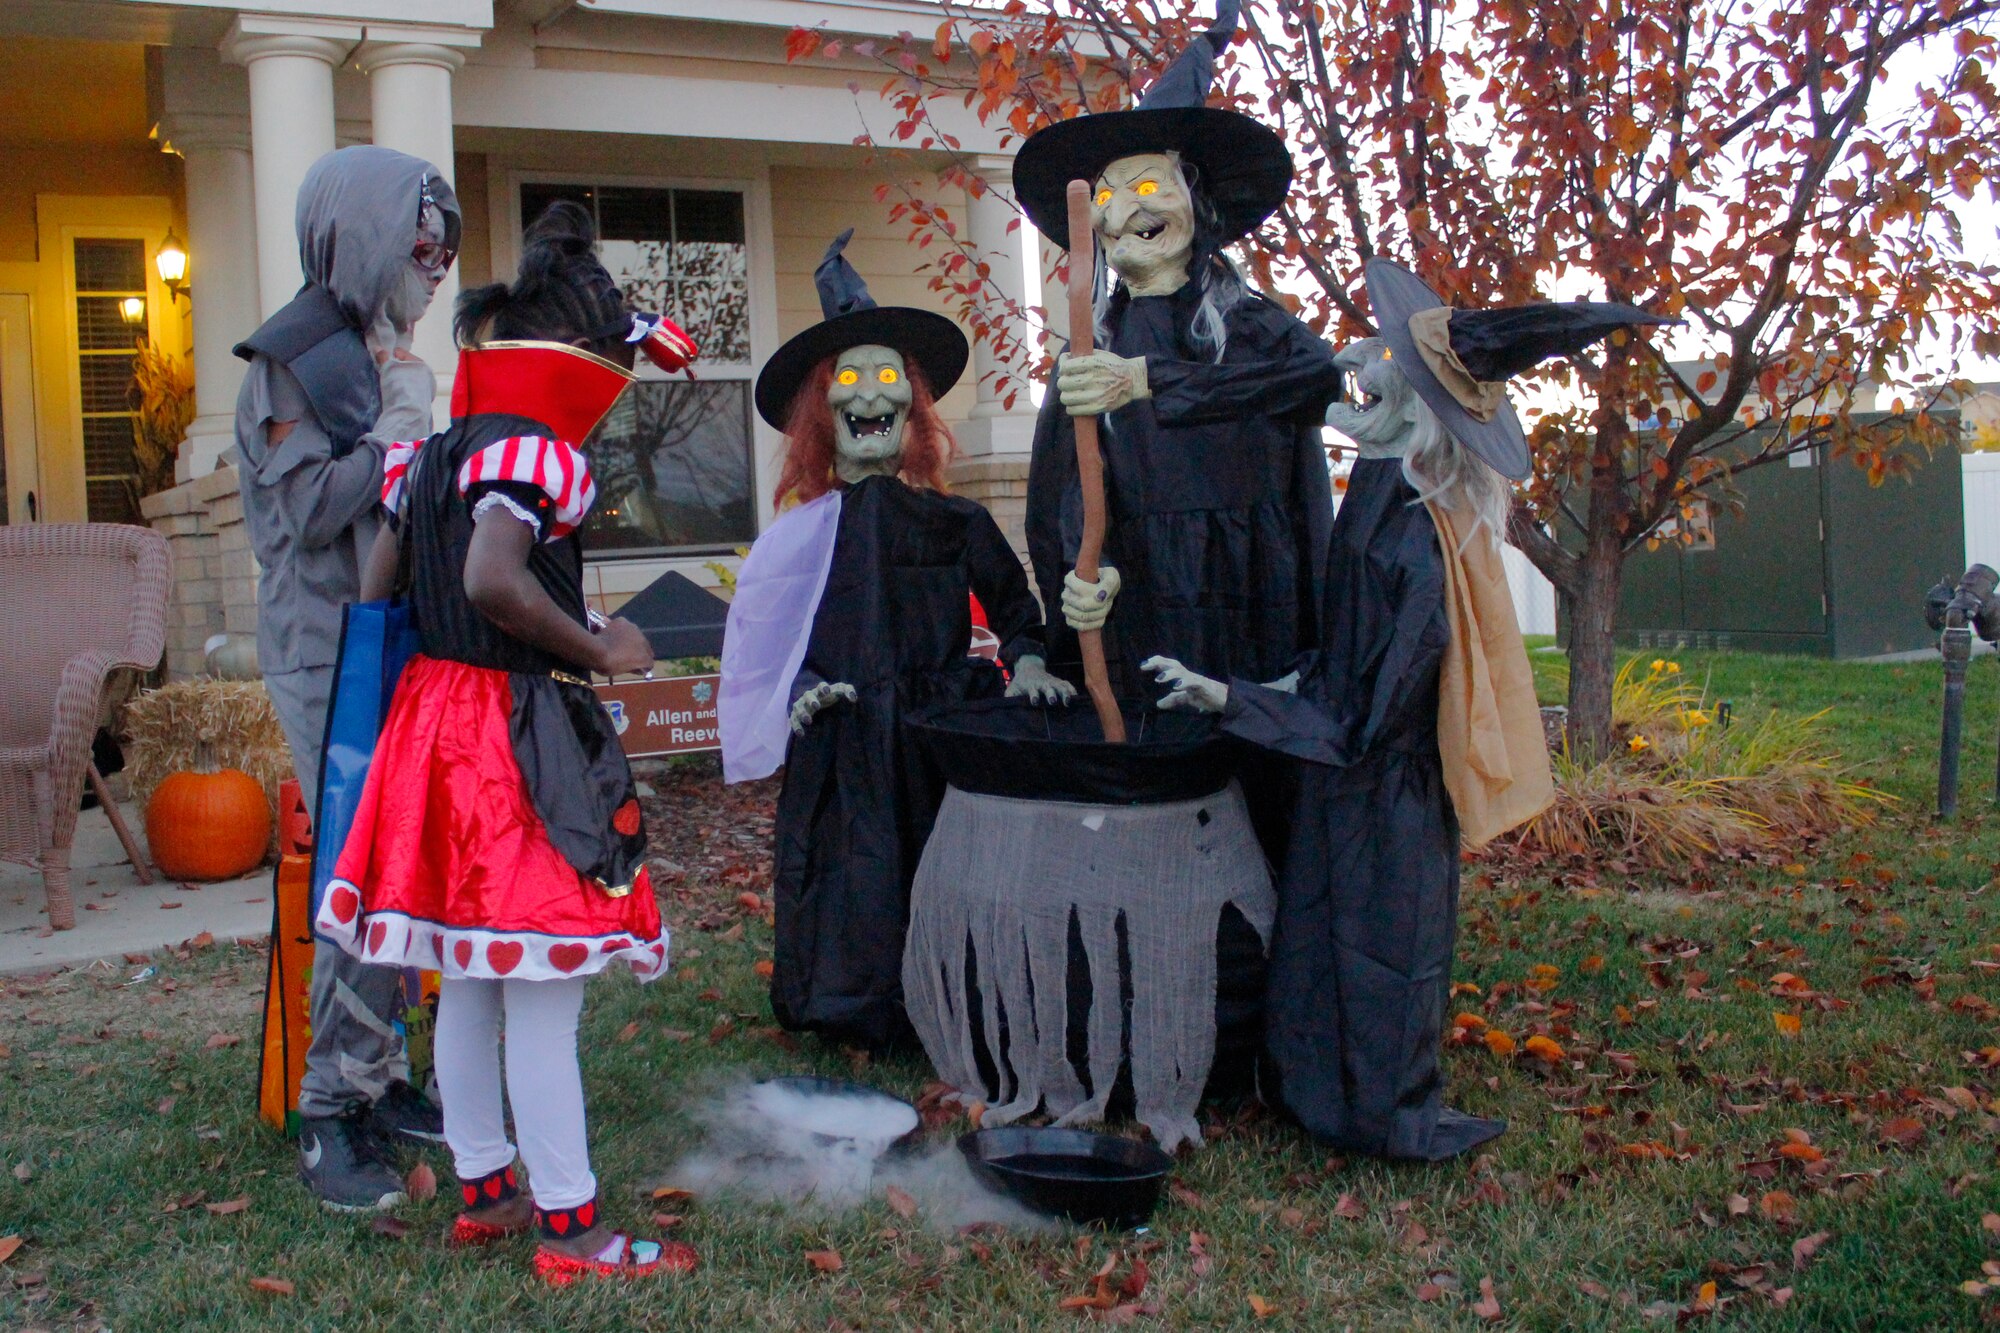 Team Buckley youth admire Halloween decorations in base housing Oct. 31, 2015, on Buckley Air Force Base, Colo. Children in base housing walked the neighborhood in costumes and received candy and treats from neighbors. (U.S. Air Force photo by Staff Sgt. Darren Scott/Released)